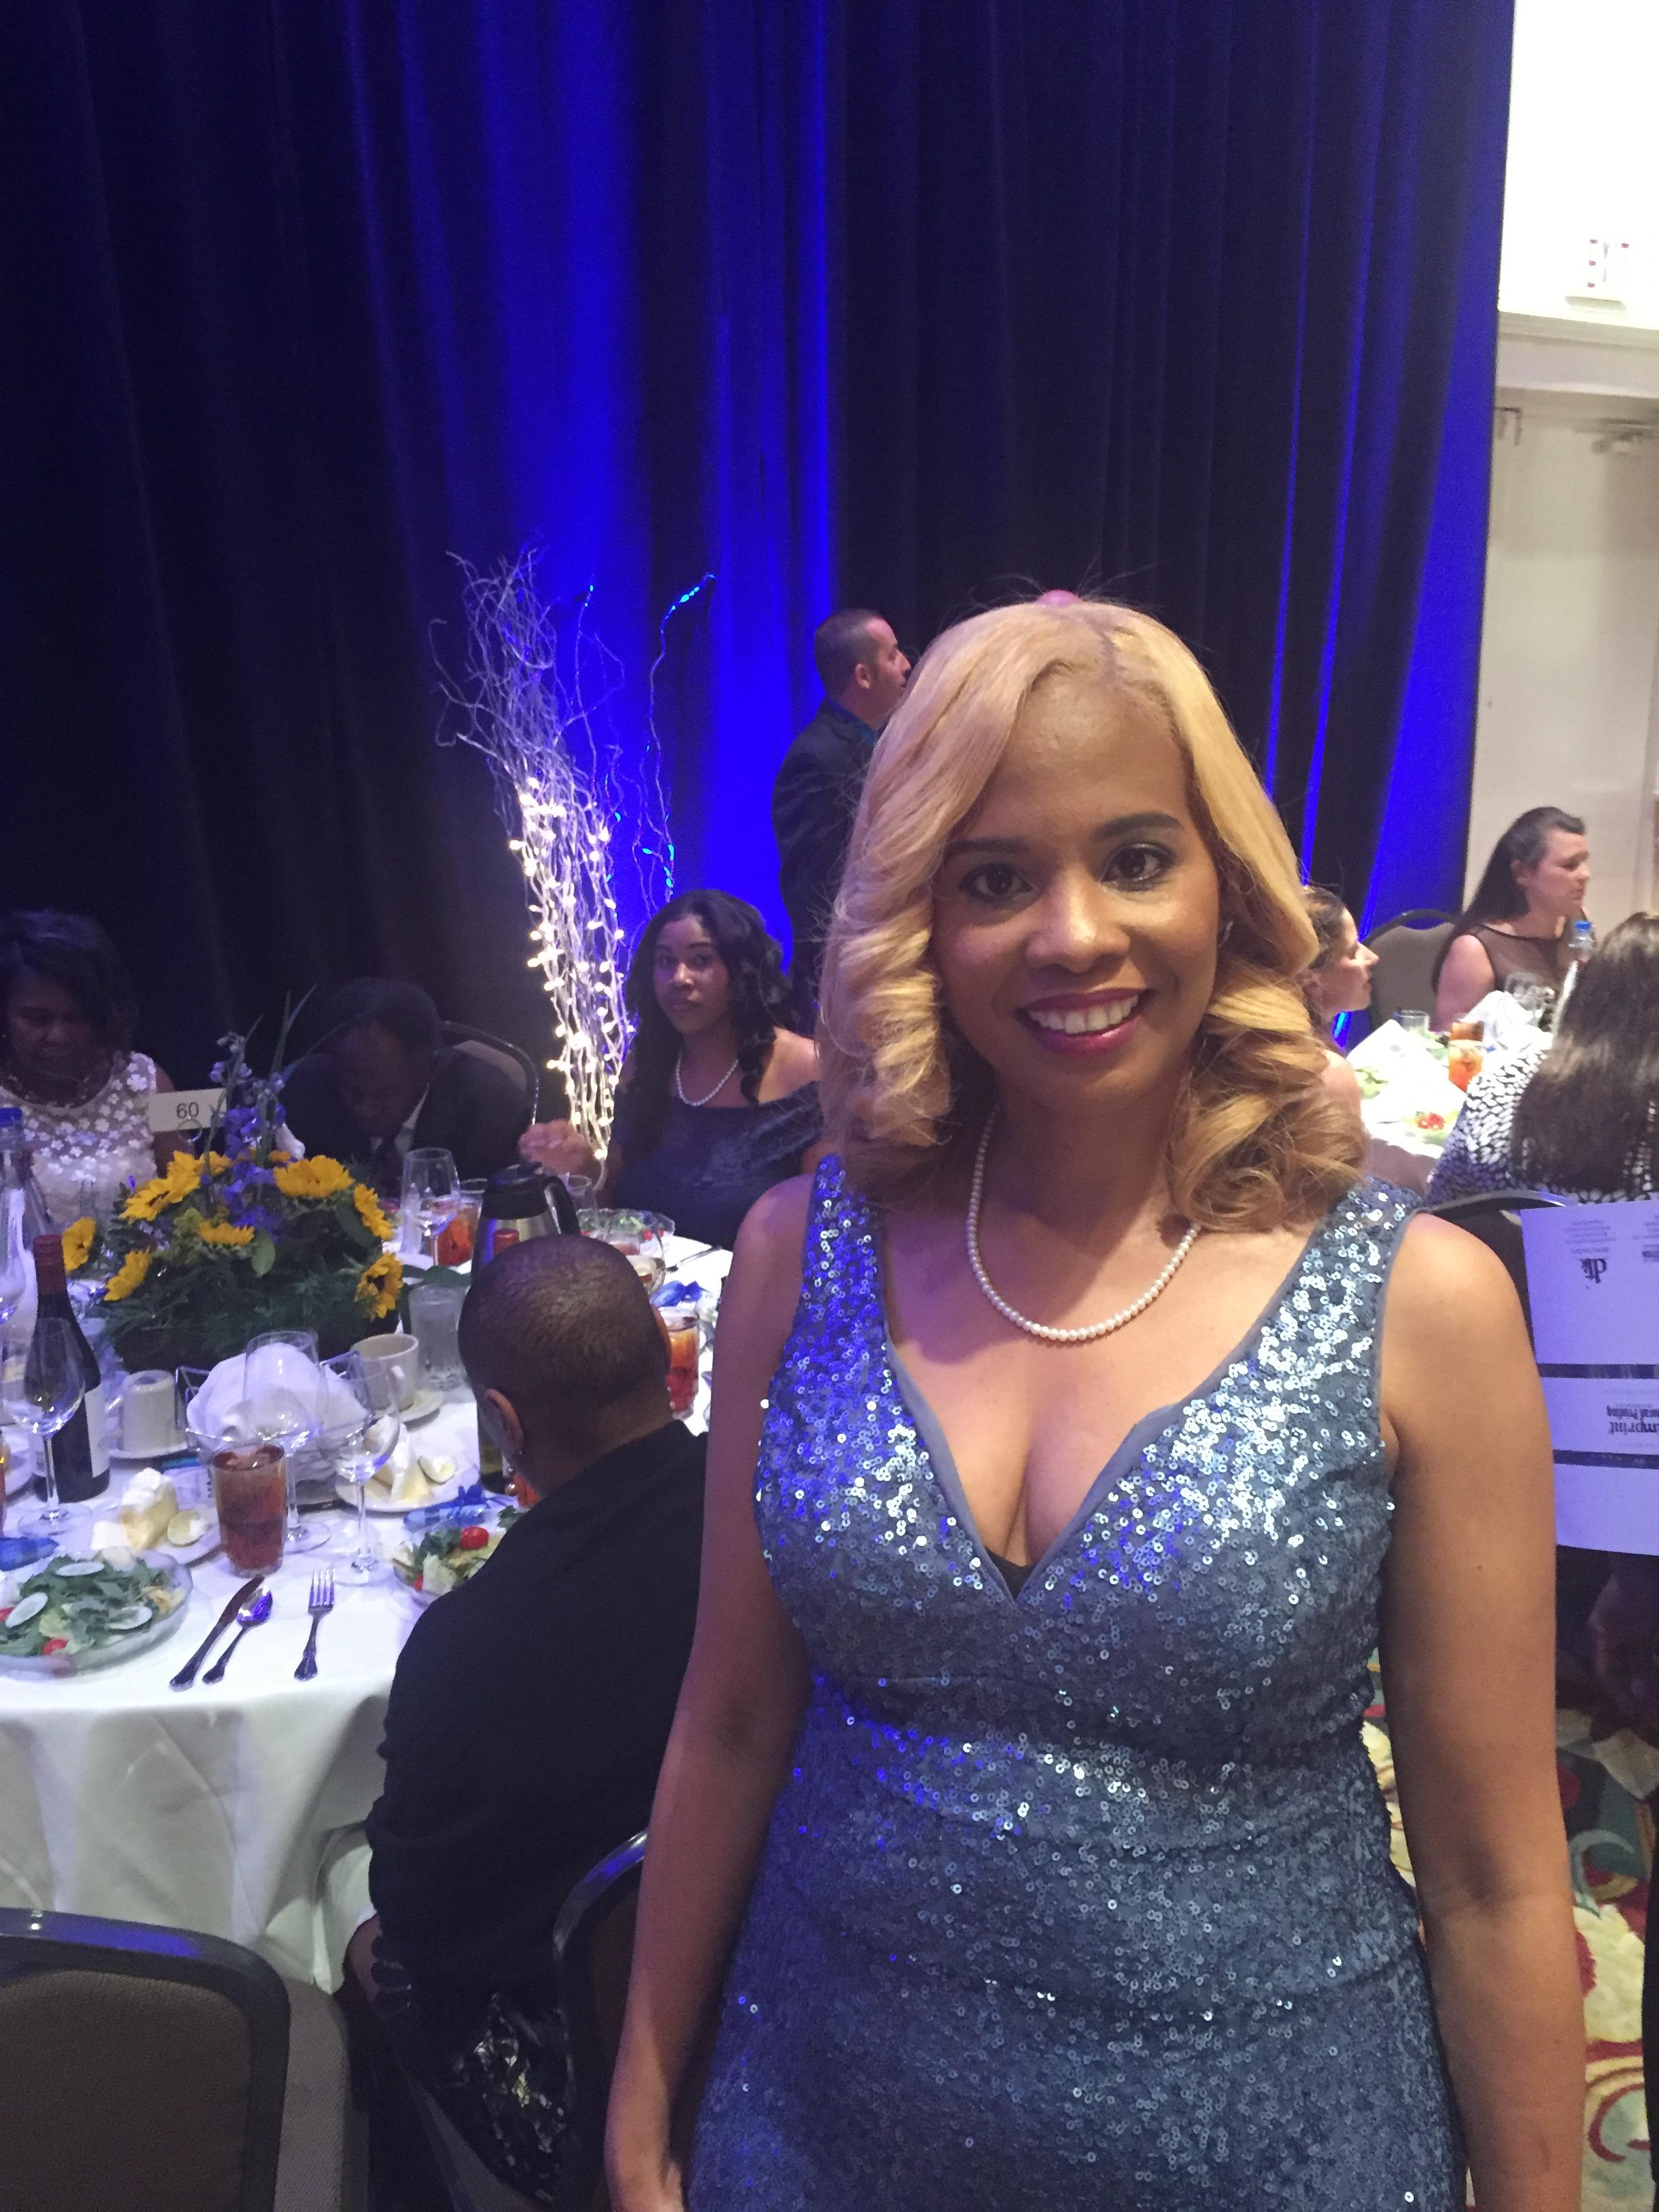 Photo of Principal Penn at the state sponsored gala honoring educators from across the state